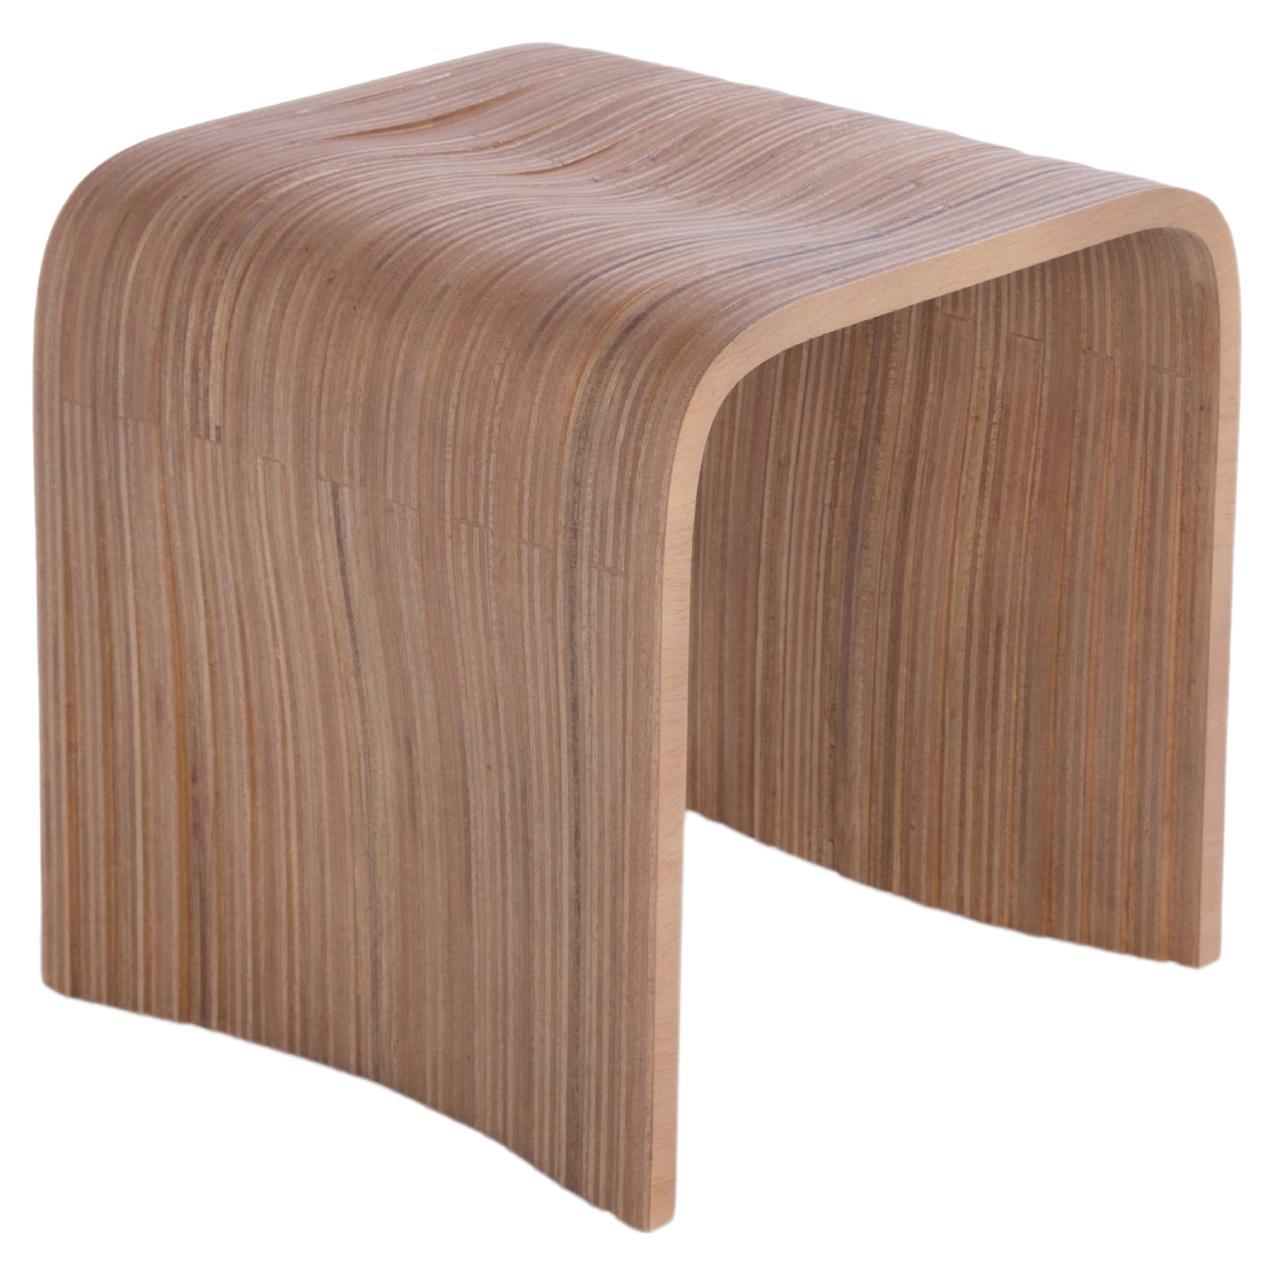 C Stool by Piegatto, a Contemporary and Sculptural Stool For Sale